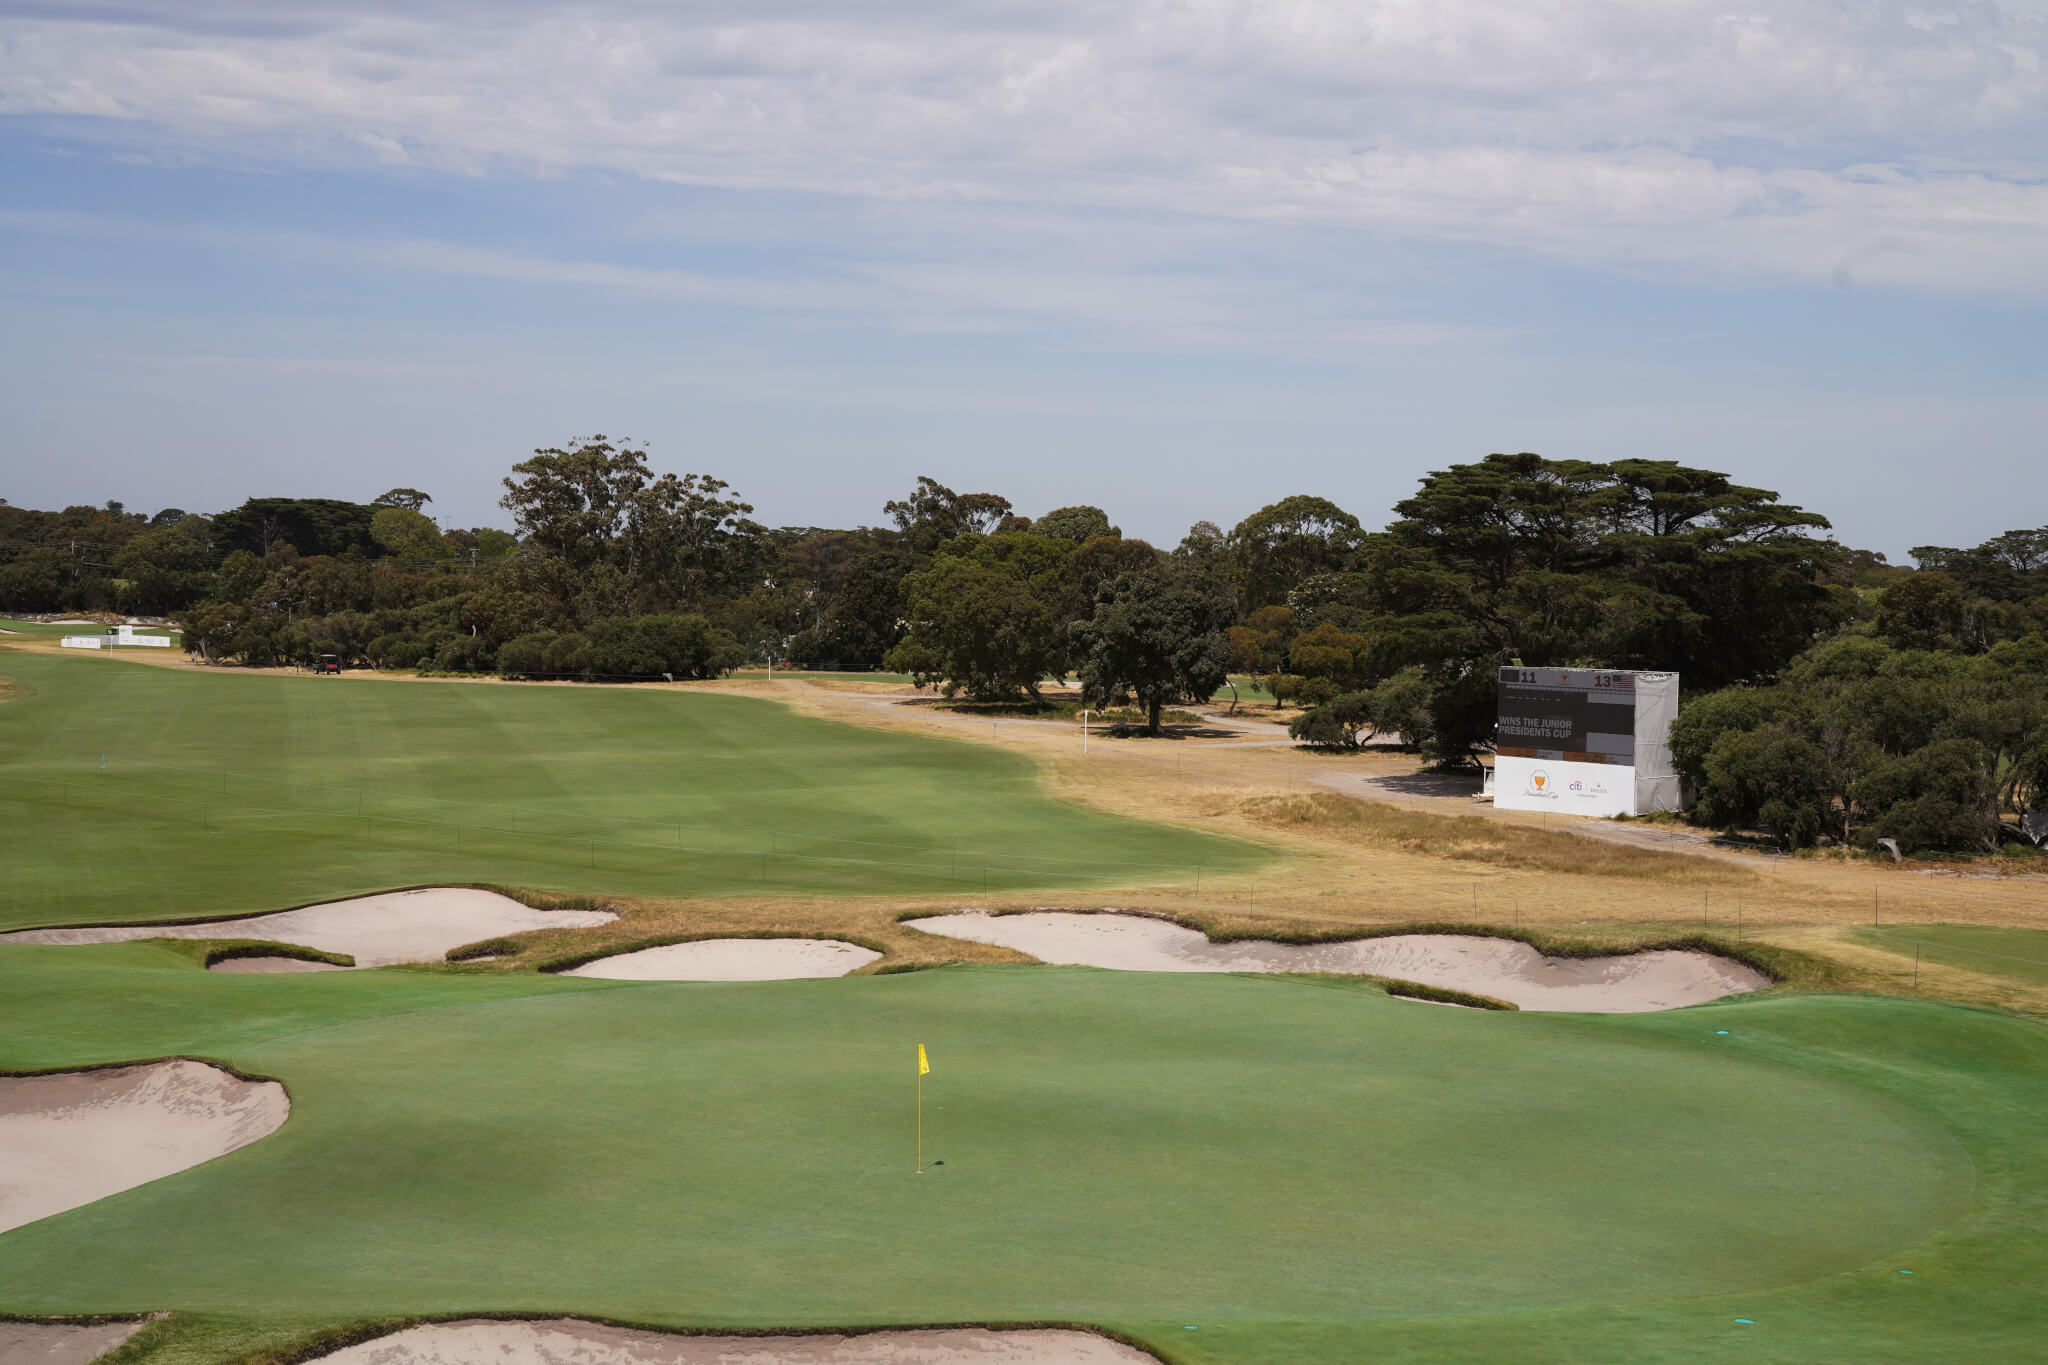 A general view of the course during a practice day at the 2019 Presidents Cup golf competition at the Royal Melbourne Golf Club in Melbourne, Australia, 09 December 2019.